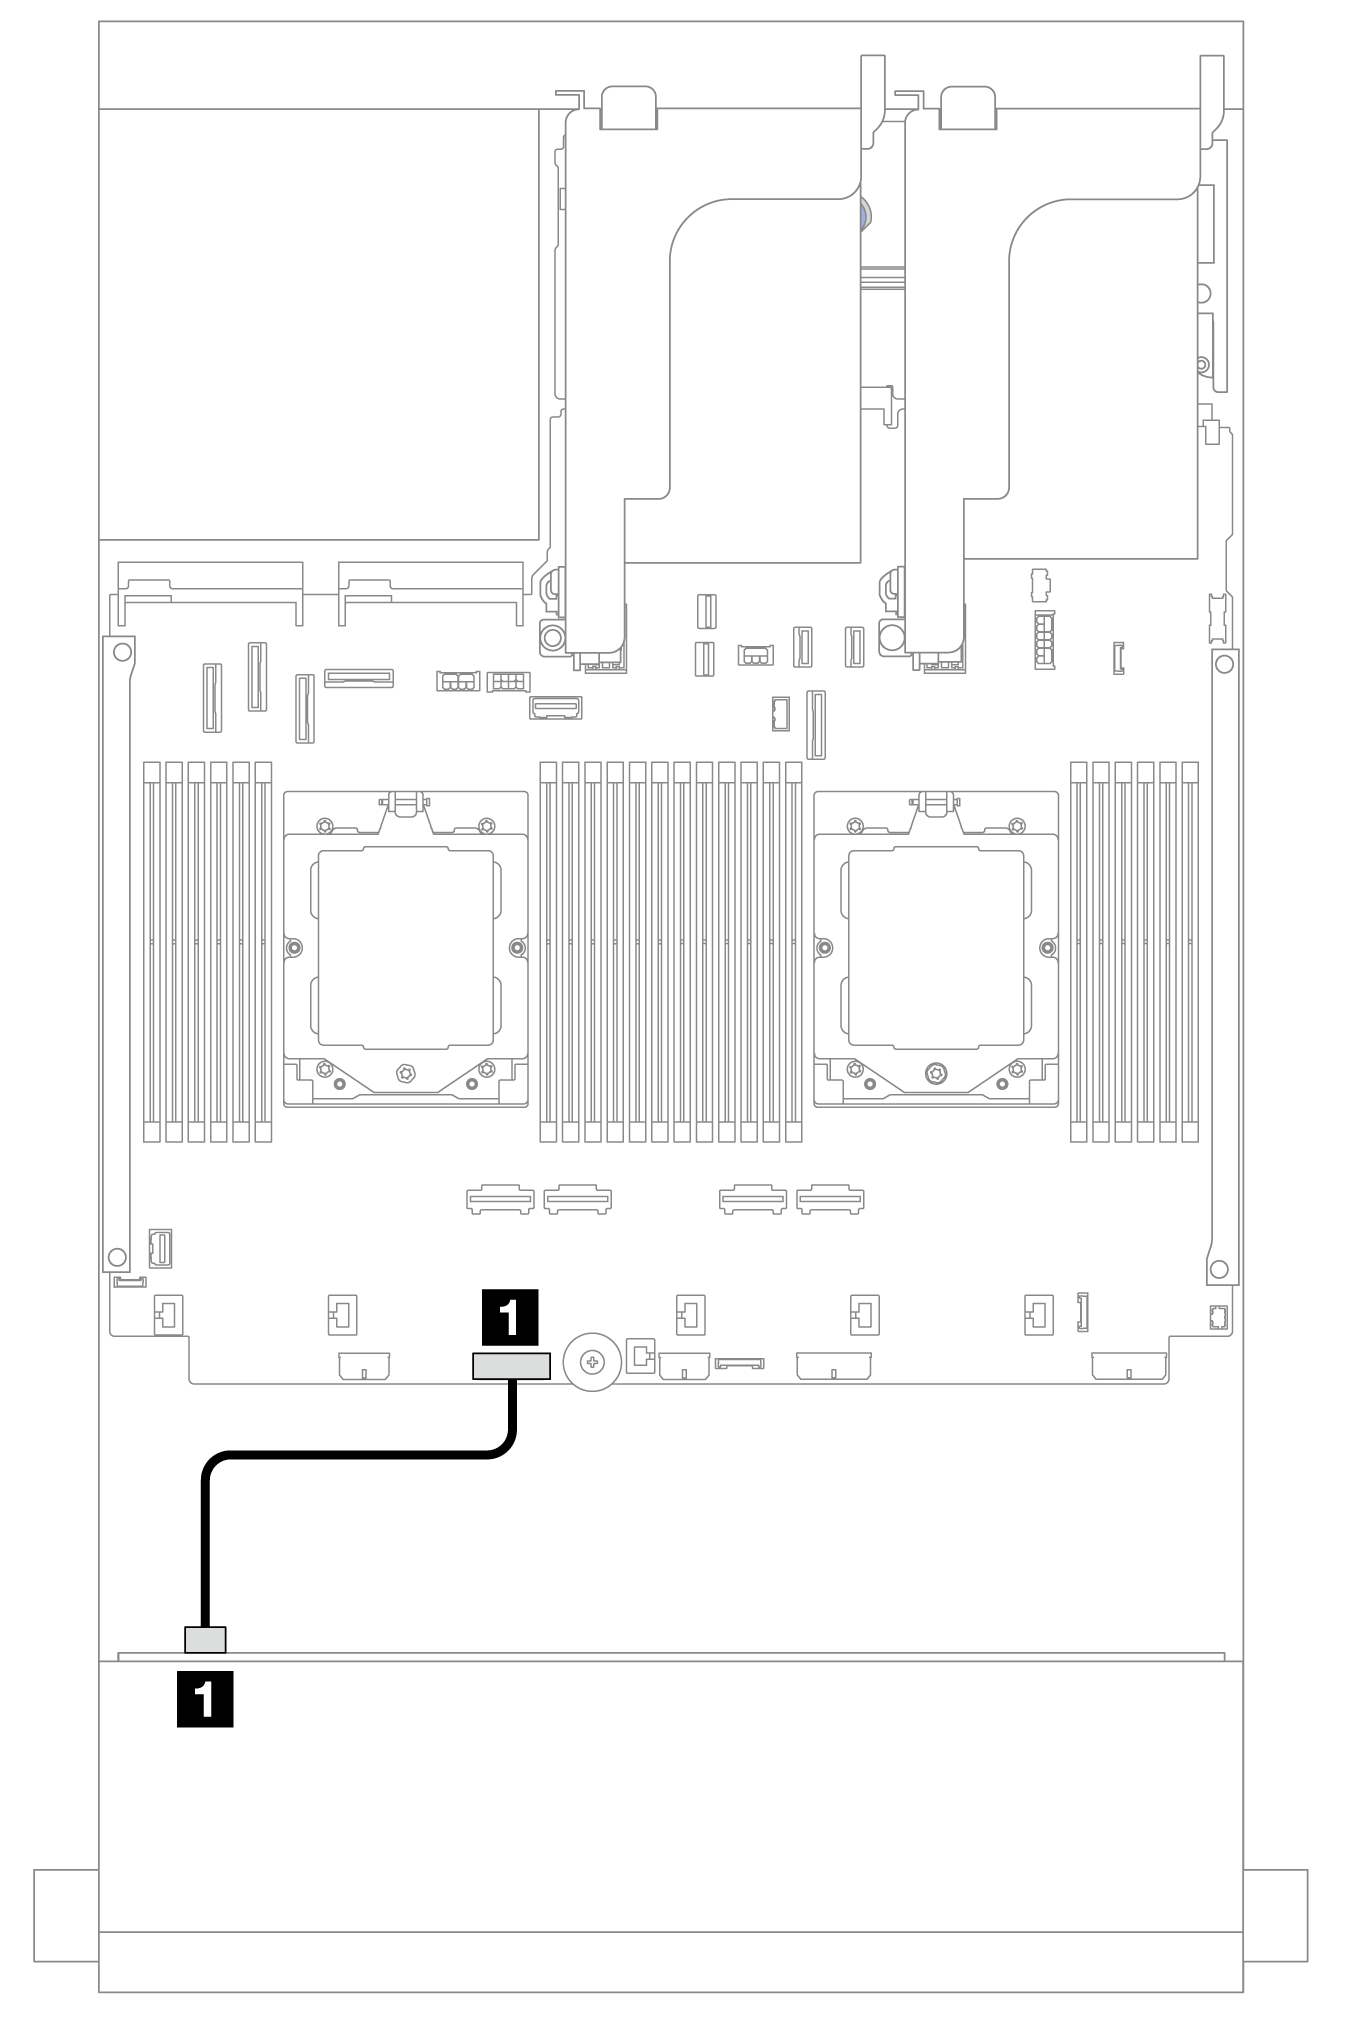 Power cable connections for the 8 x 3.5-inch SAS/SATA backplane and 12 x 3.5-inch SAS/SATA expander backplane